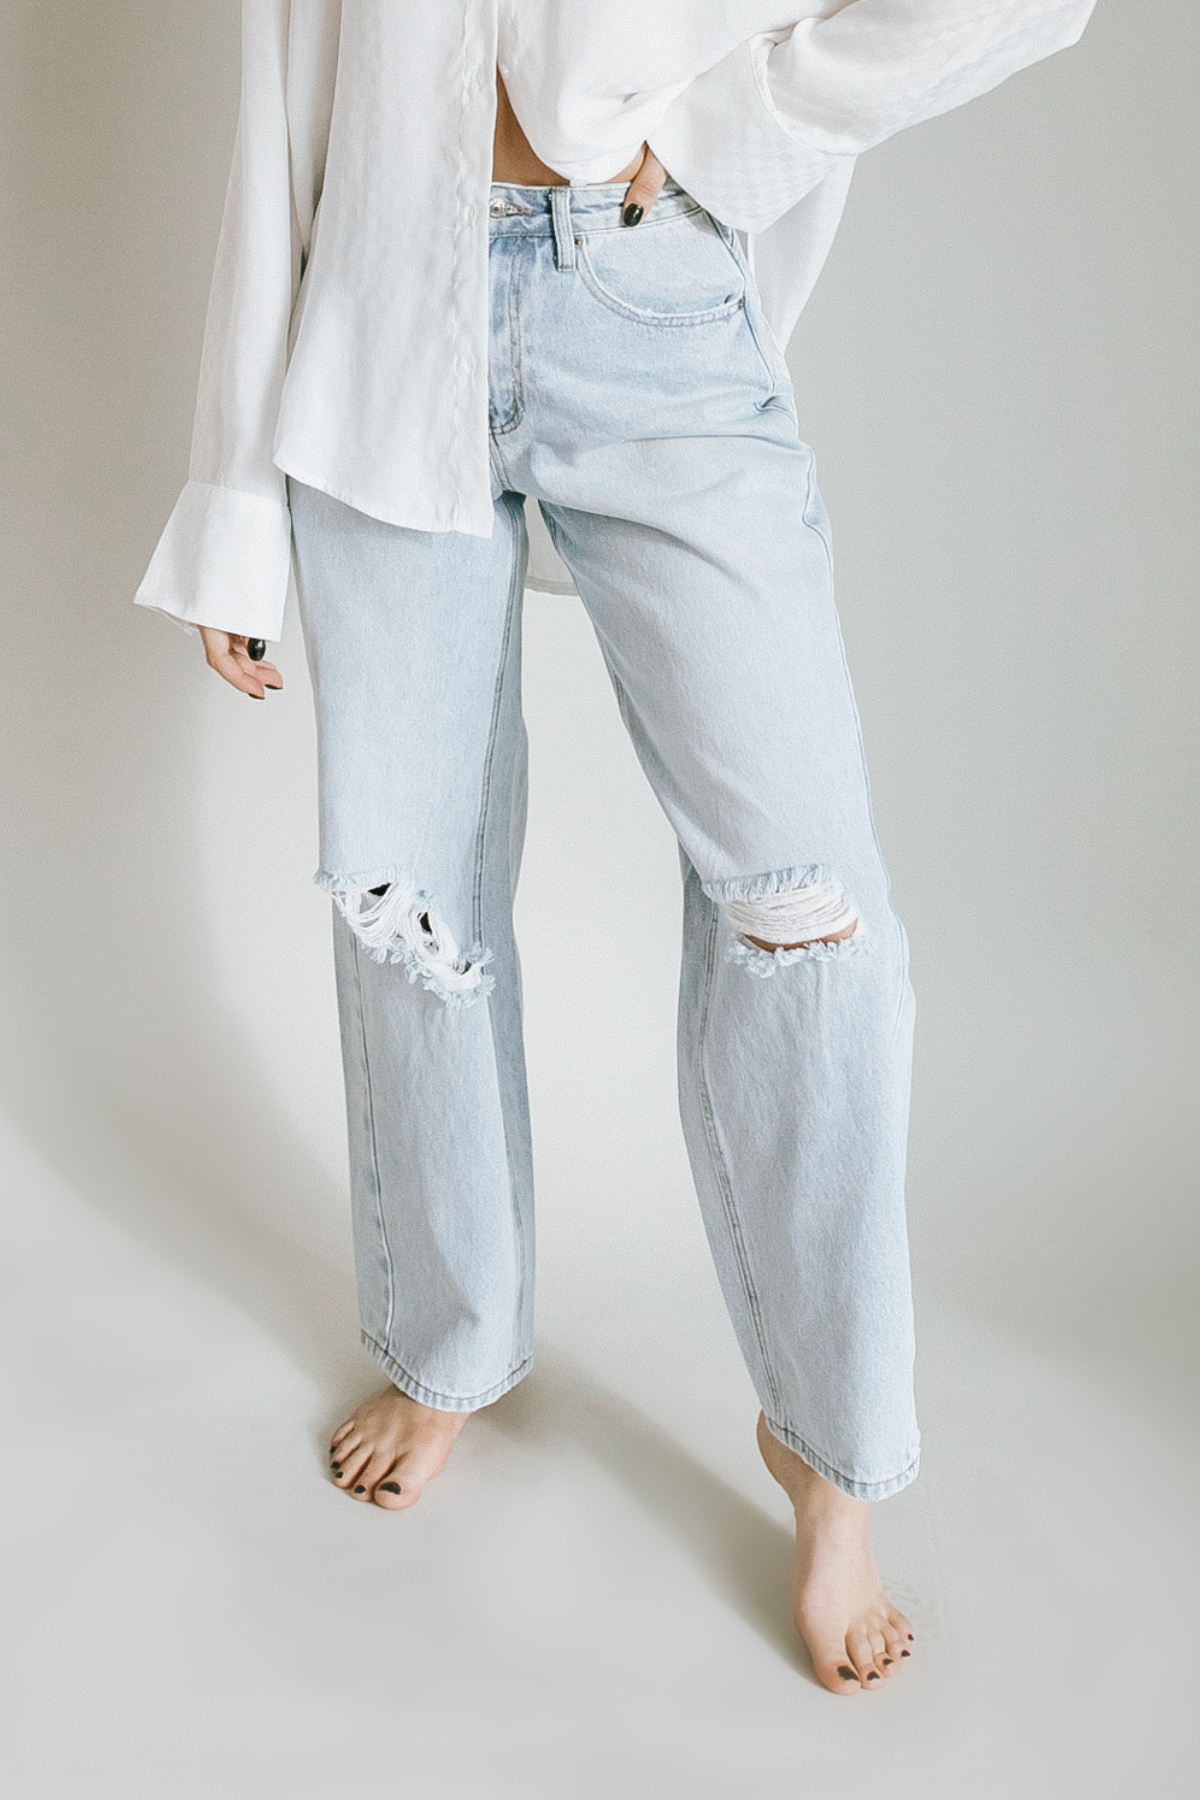 Buy AE Next Level High-Waisted Jegging online